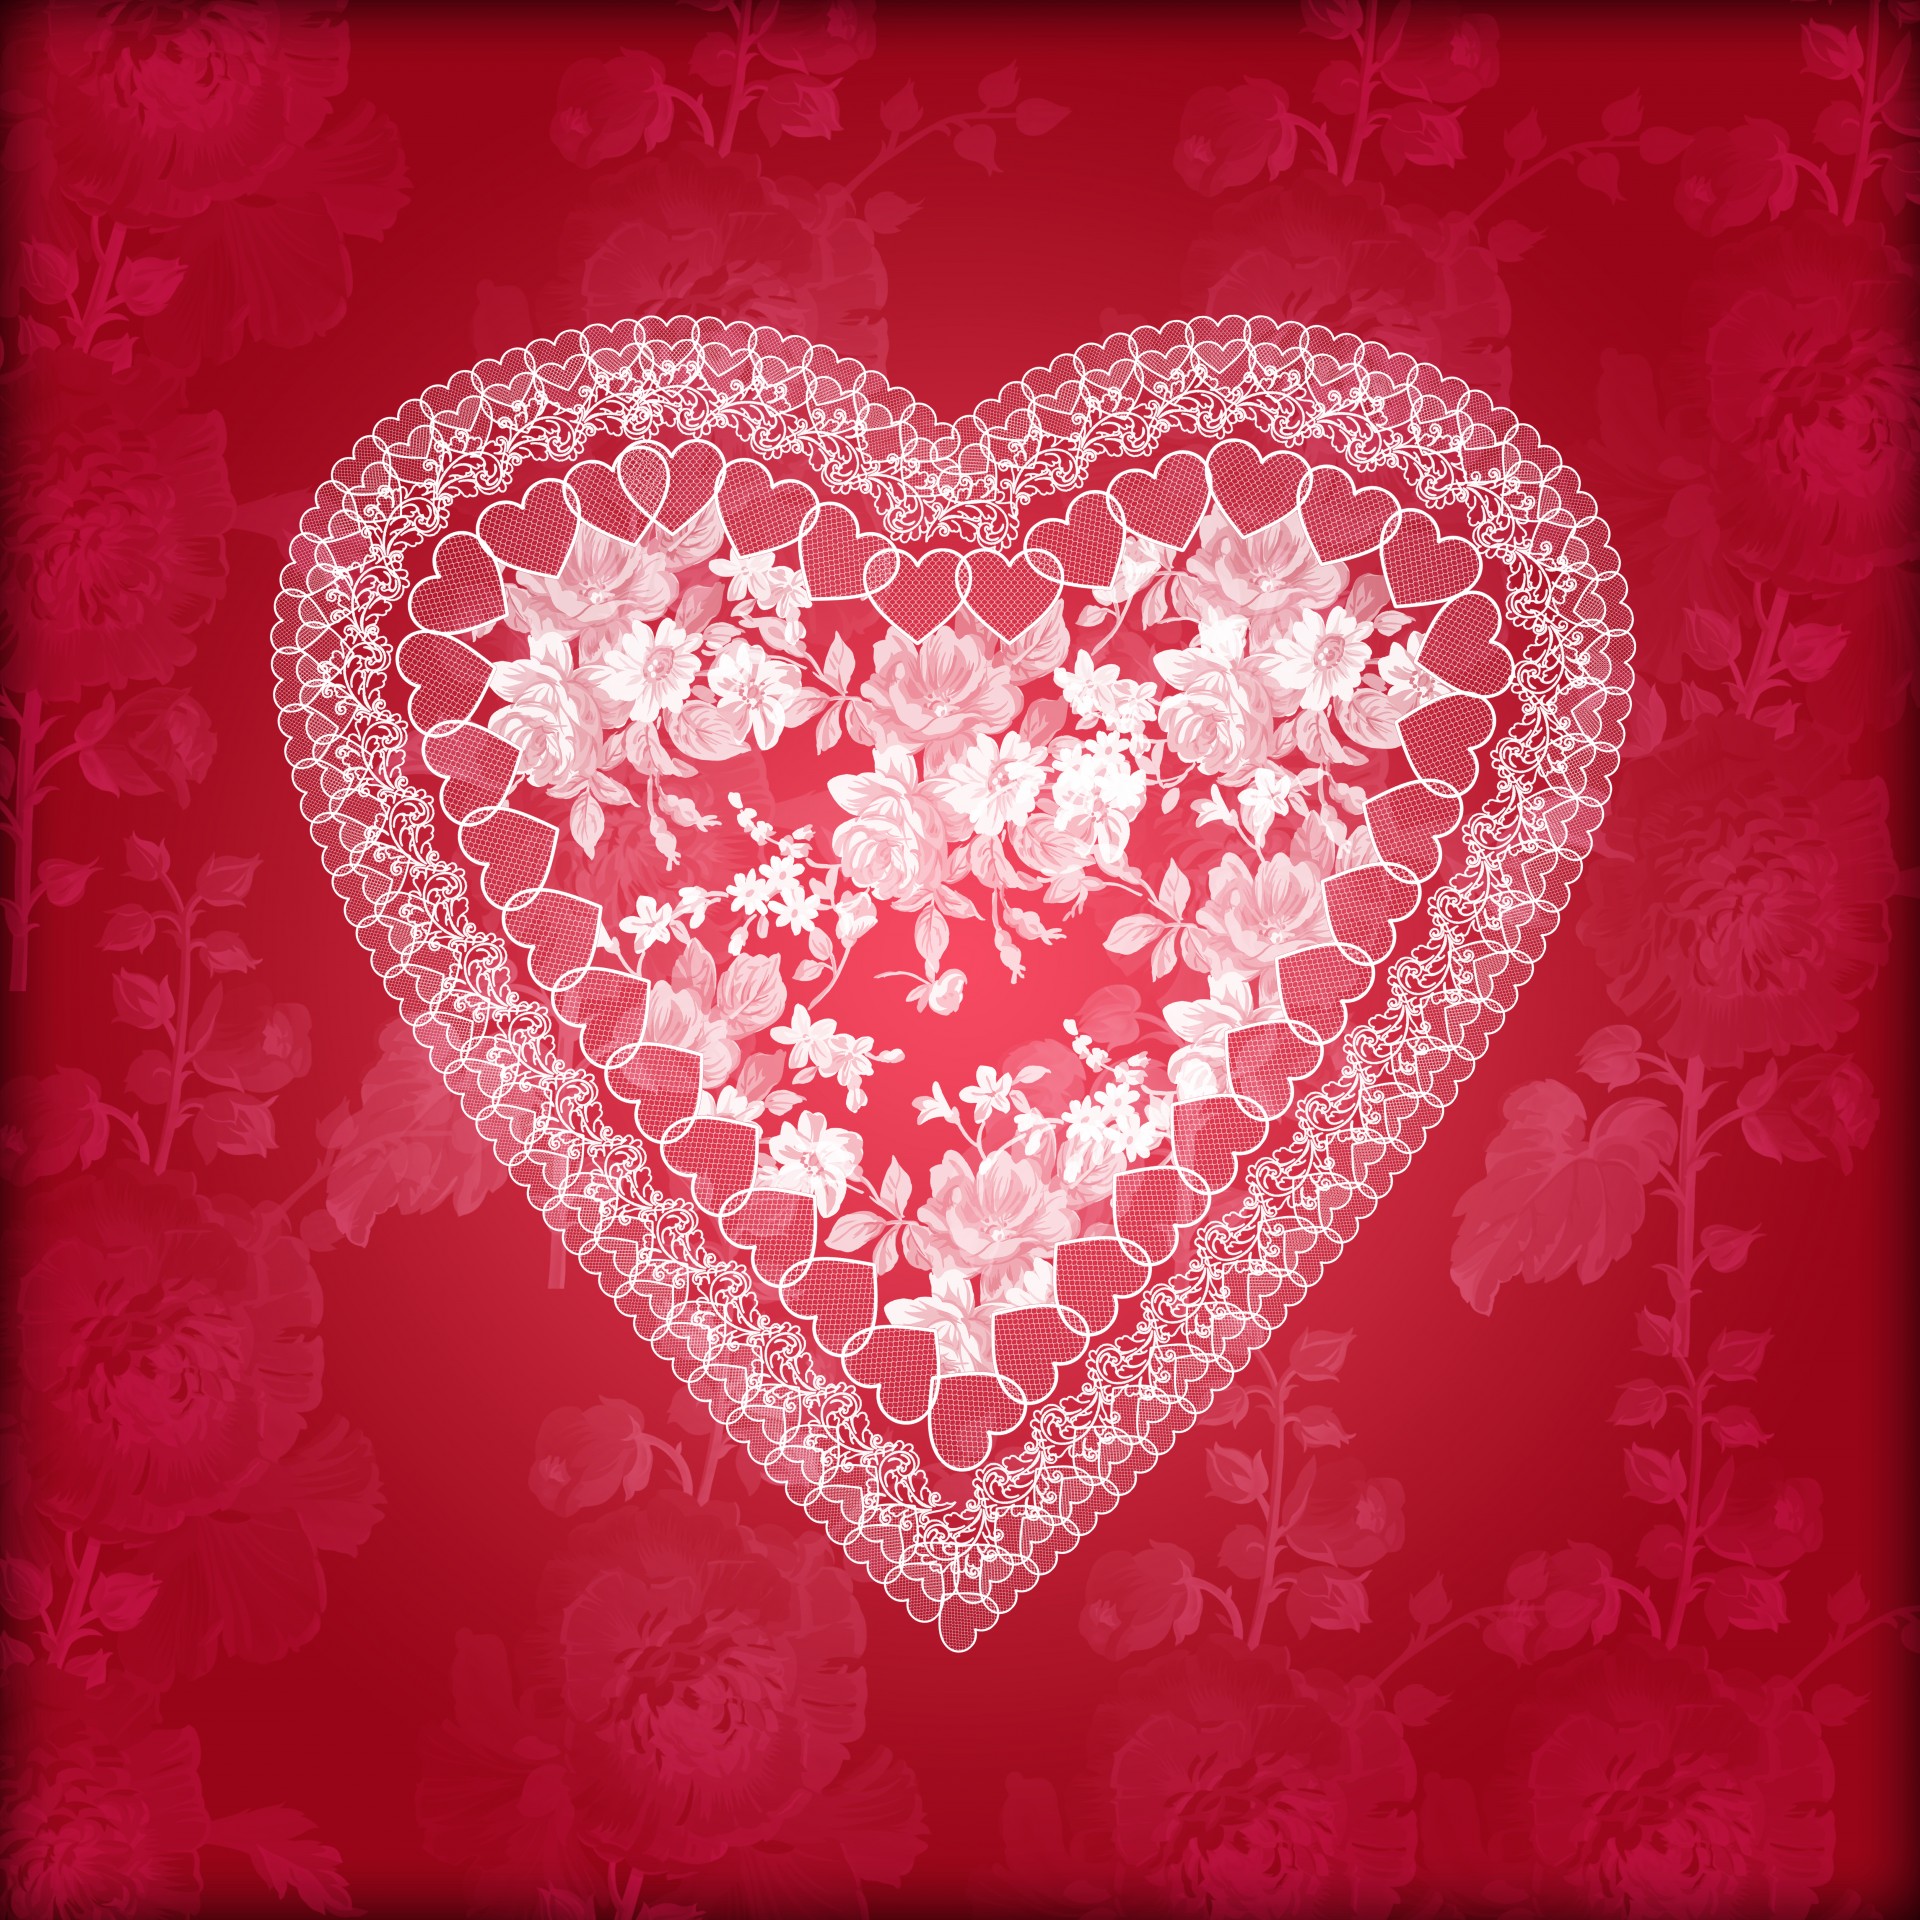 Lace And Floral Heart On Red